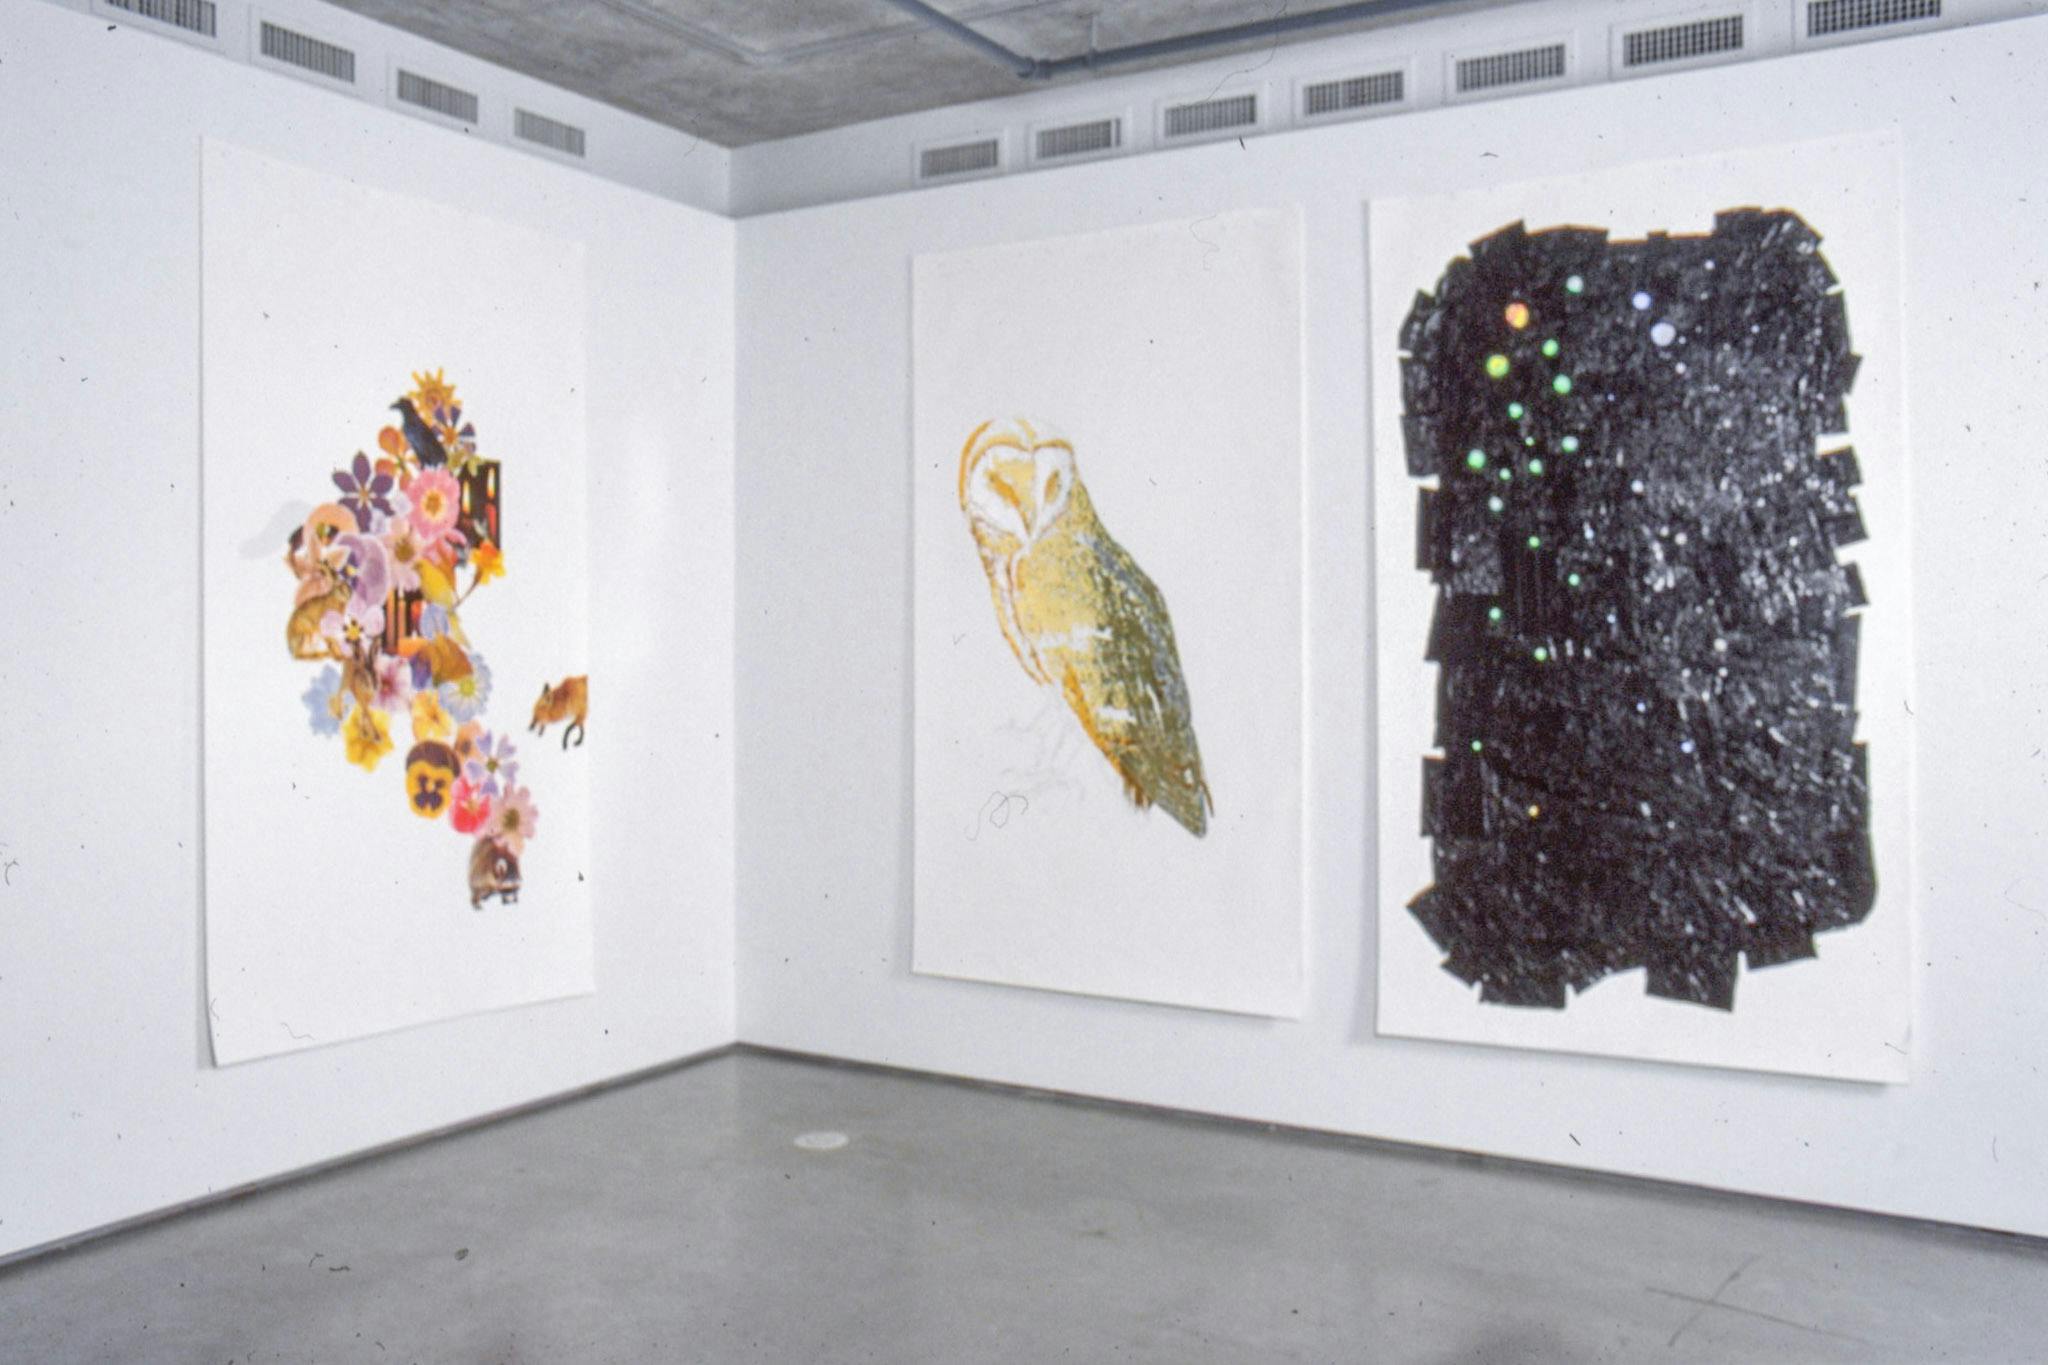 An installation image of three large collage works on the walls. Three collage pieces, each of them made on a white sheet of paper, which length is as long as the length of the gallery wall. The middle collage piece depicts an owl.